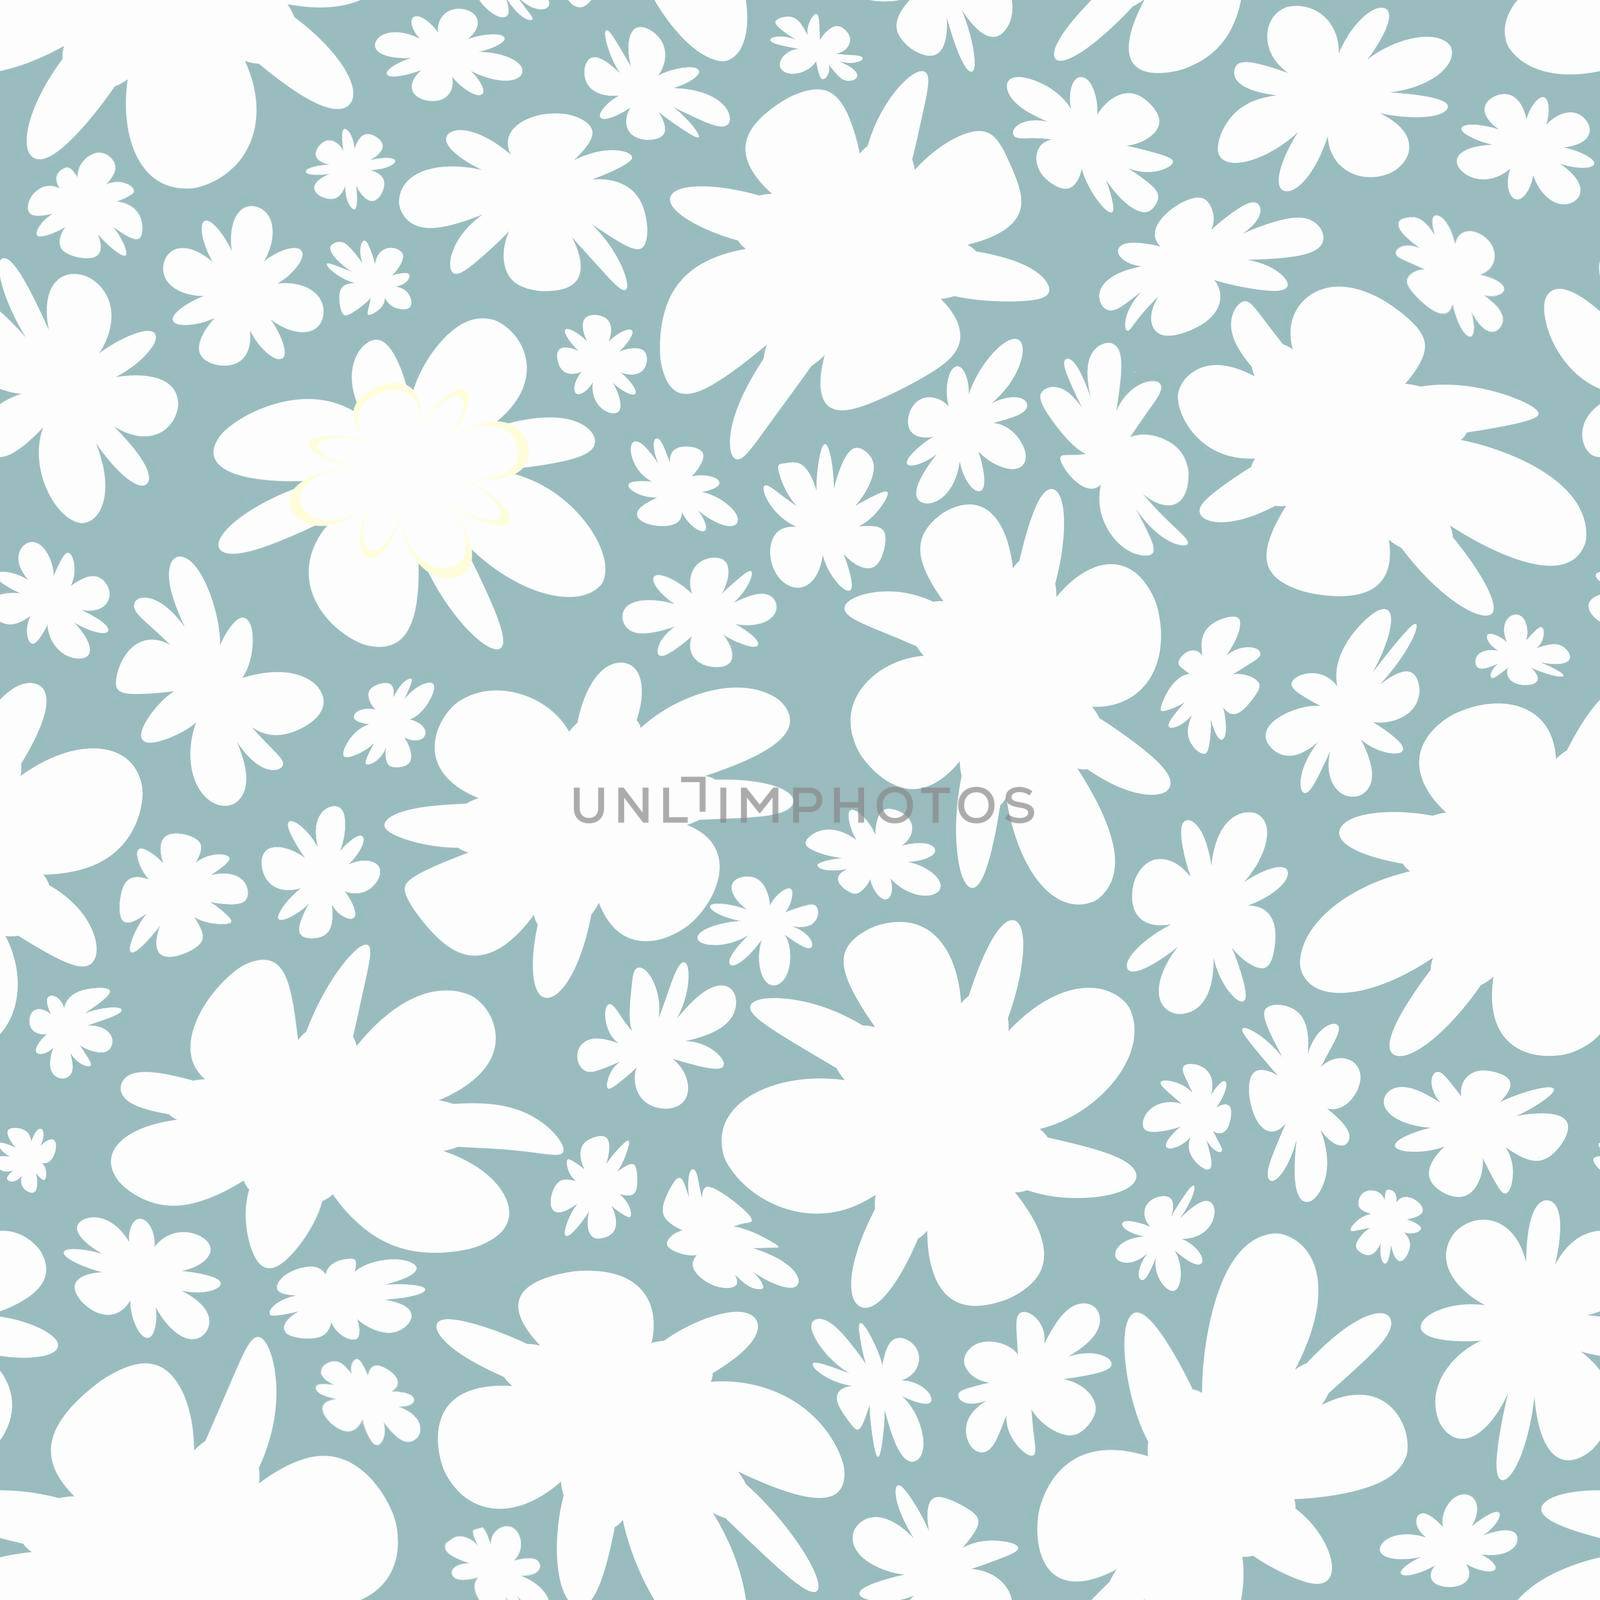 Trendy fabric pattern with miniature flowers.Summer print.Fashion design.Motifs scattered random.Elegant template for fashion prints.Good for fashion,textile,fabric,gift wrapping paper.Pastel shades.